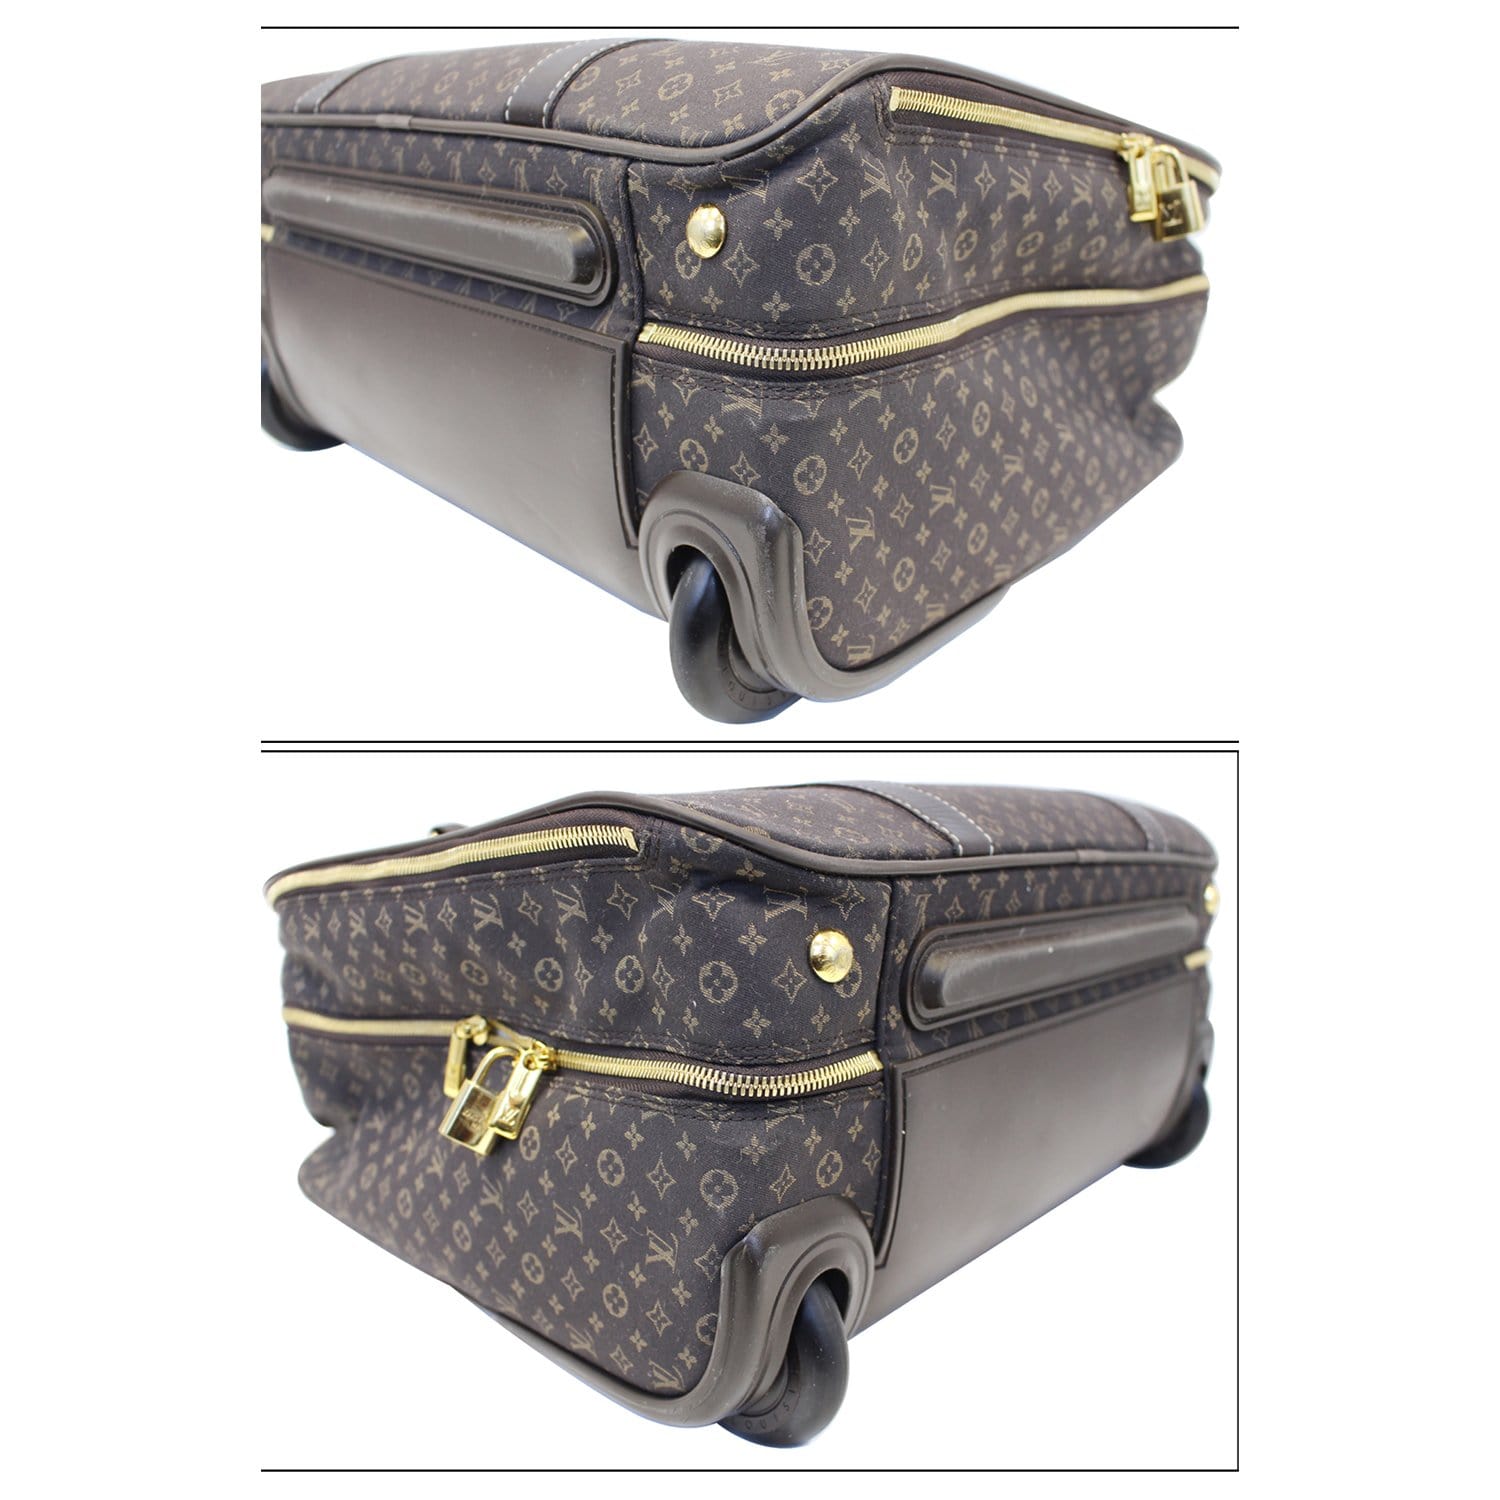 Pégase 50 Suitcase (Authentic Pre-Owned) – The Lady Bag